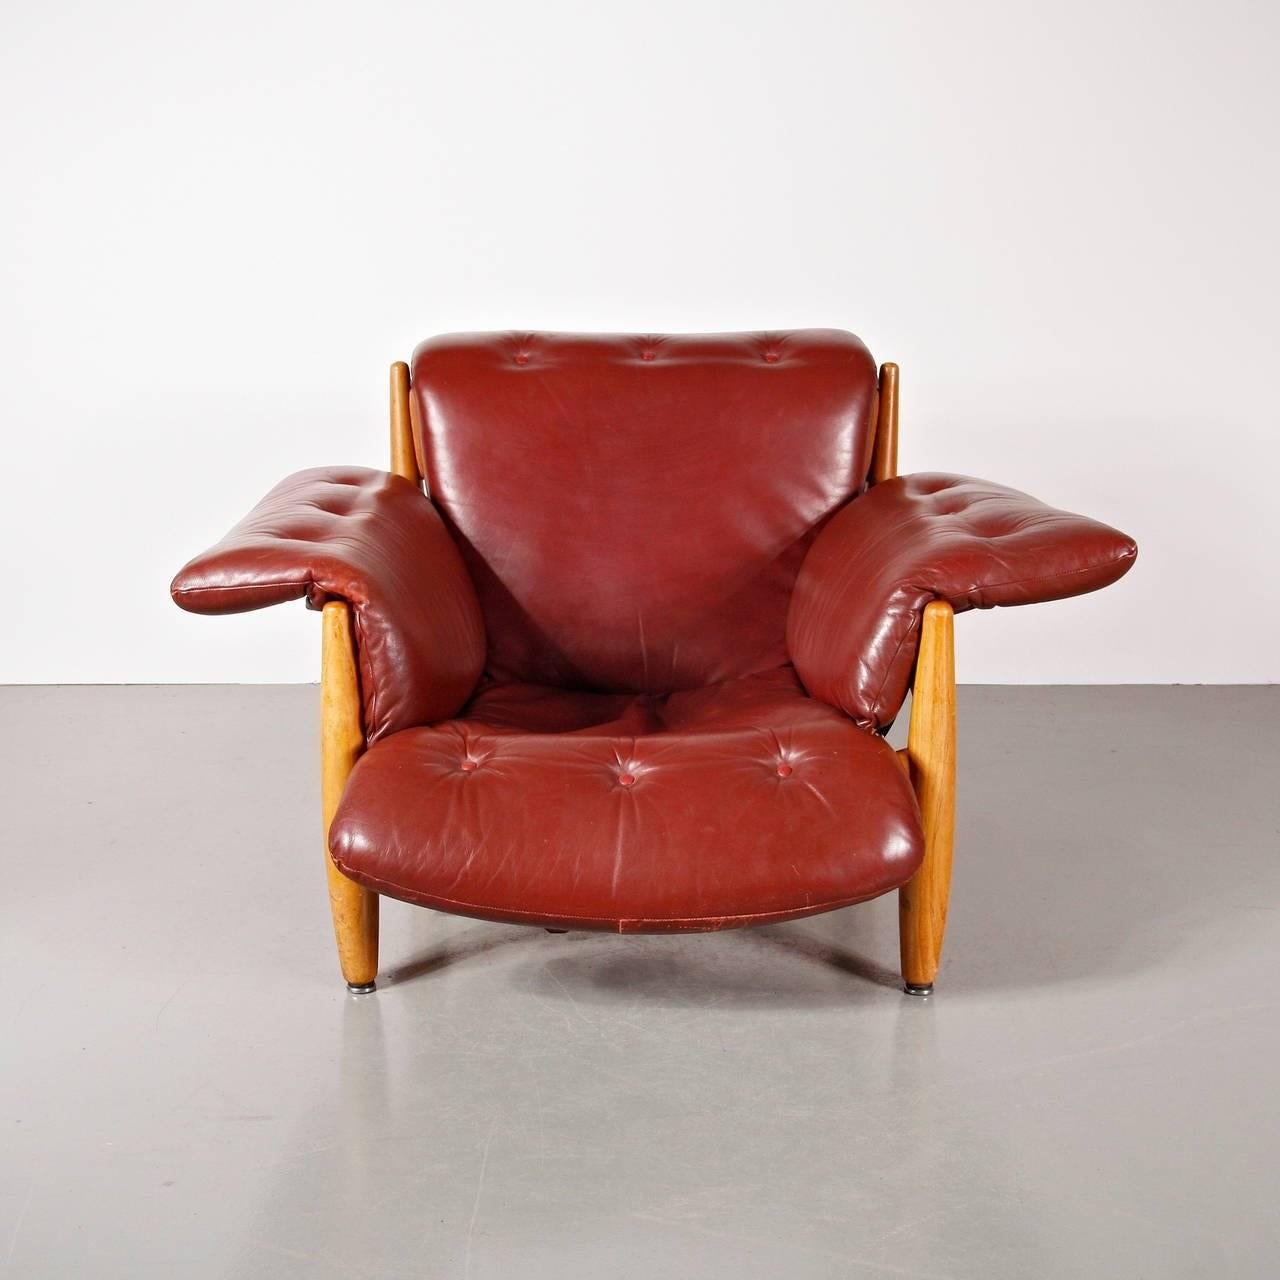 Iconic Sheriff lounge chair designed by Sergio Rodrigues in Brazil, manufactured by ISA Bergamo in Italy, circa 1960.

This amazing piece is made of the highest quality Brazilian Jacaranda frame and original leather stripes and cushions. Crafted